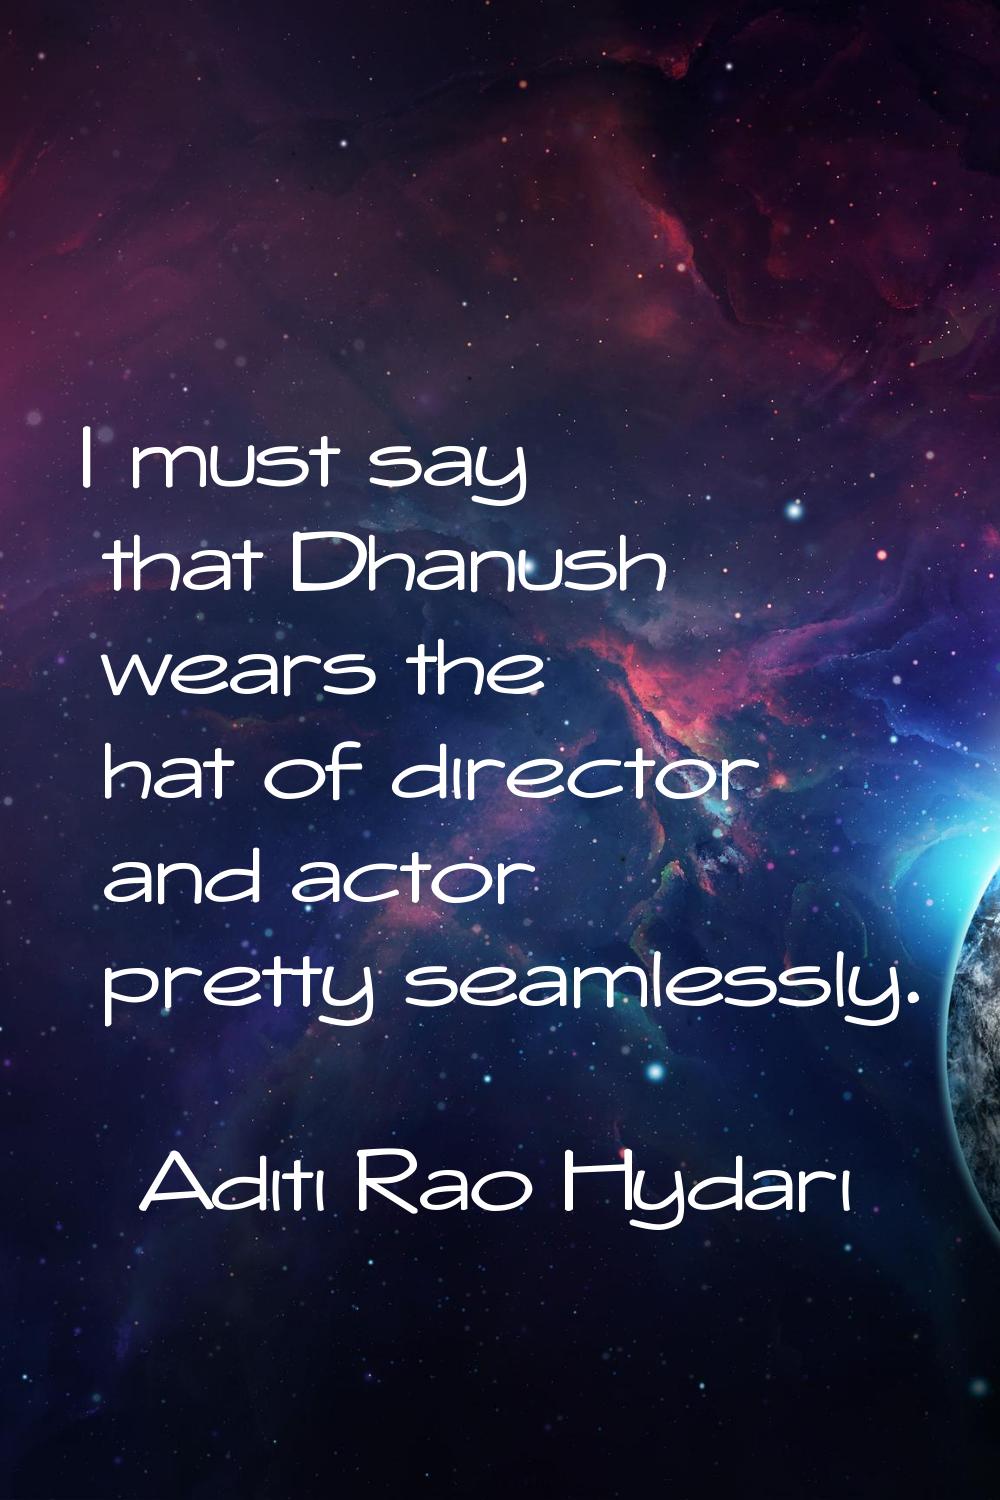 I must say that Dhanush wears the hat of director and actor pretty seamlessly.